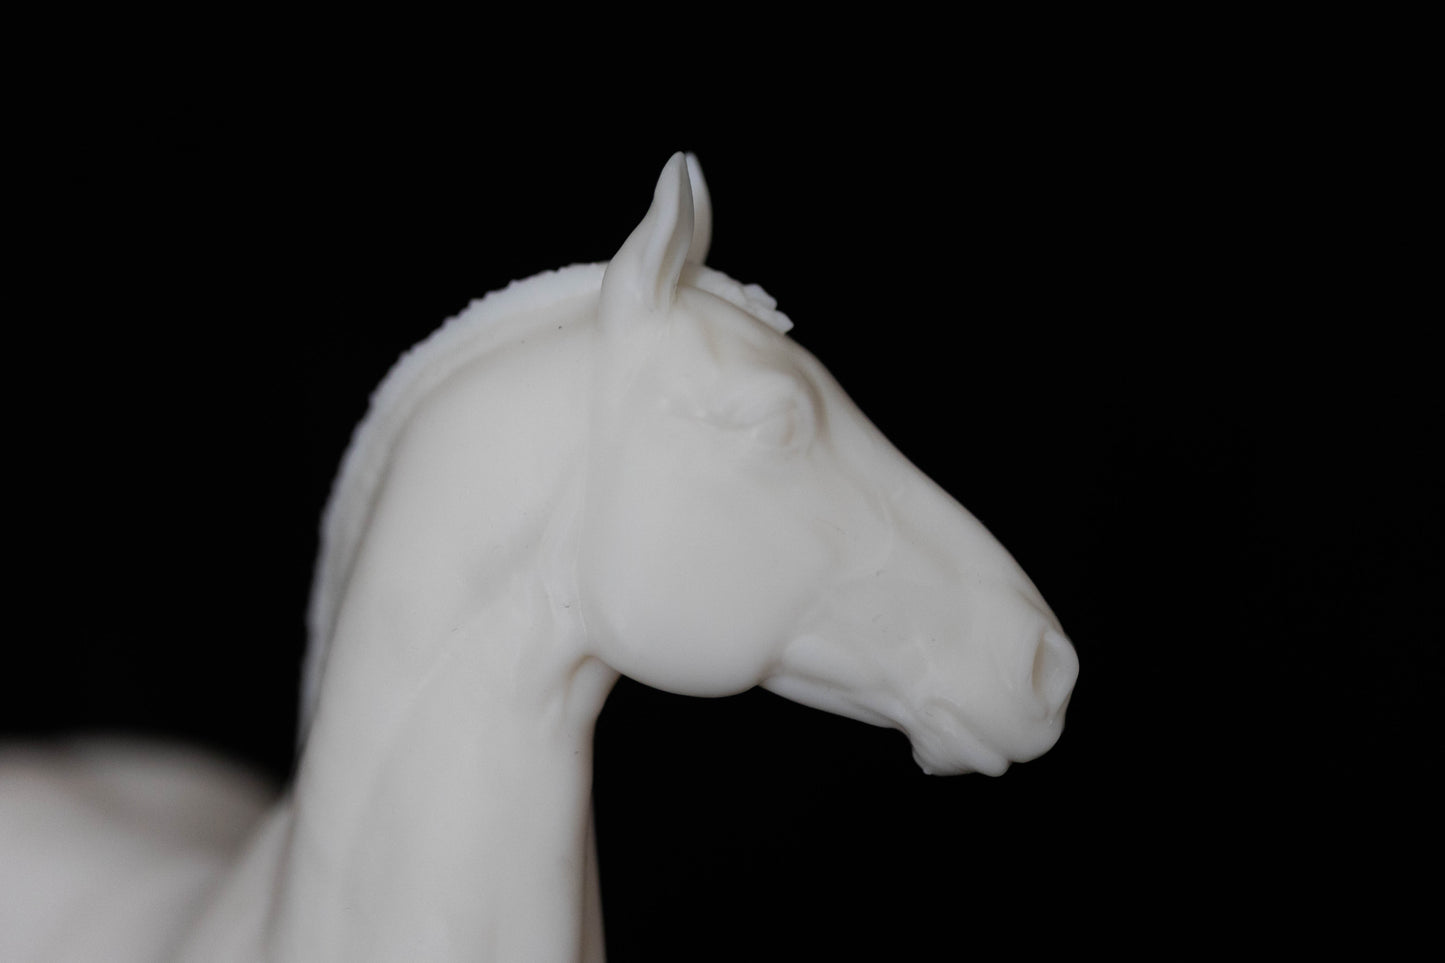 Traditional scale Grade horse / Cob - White resin ready to paint - Pre - Order - LTD TO 10 COPIES